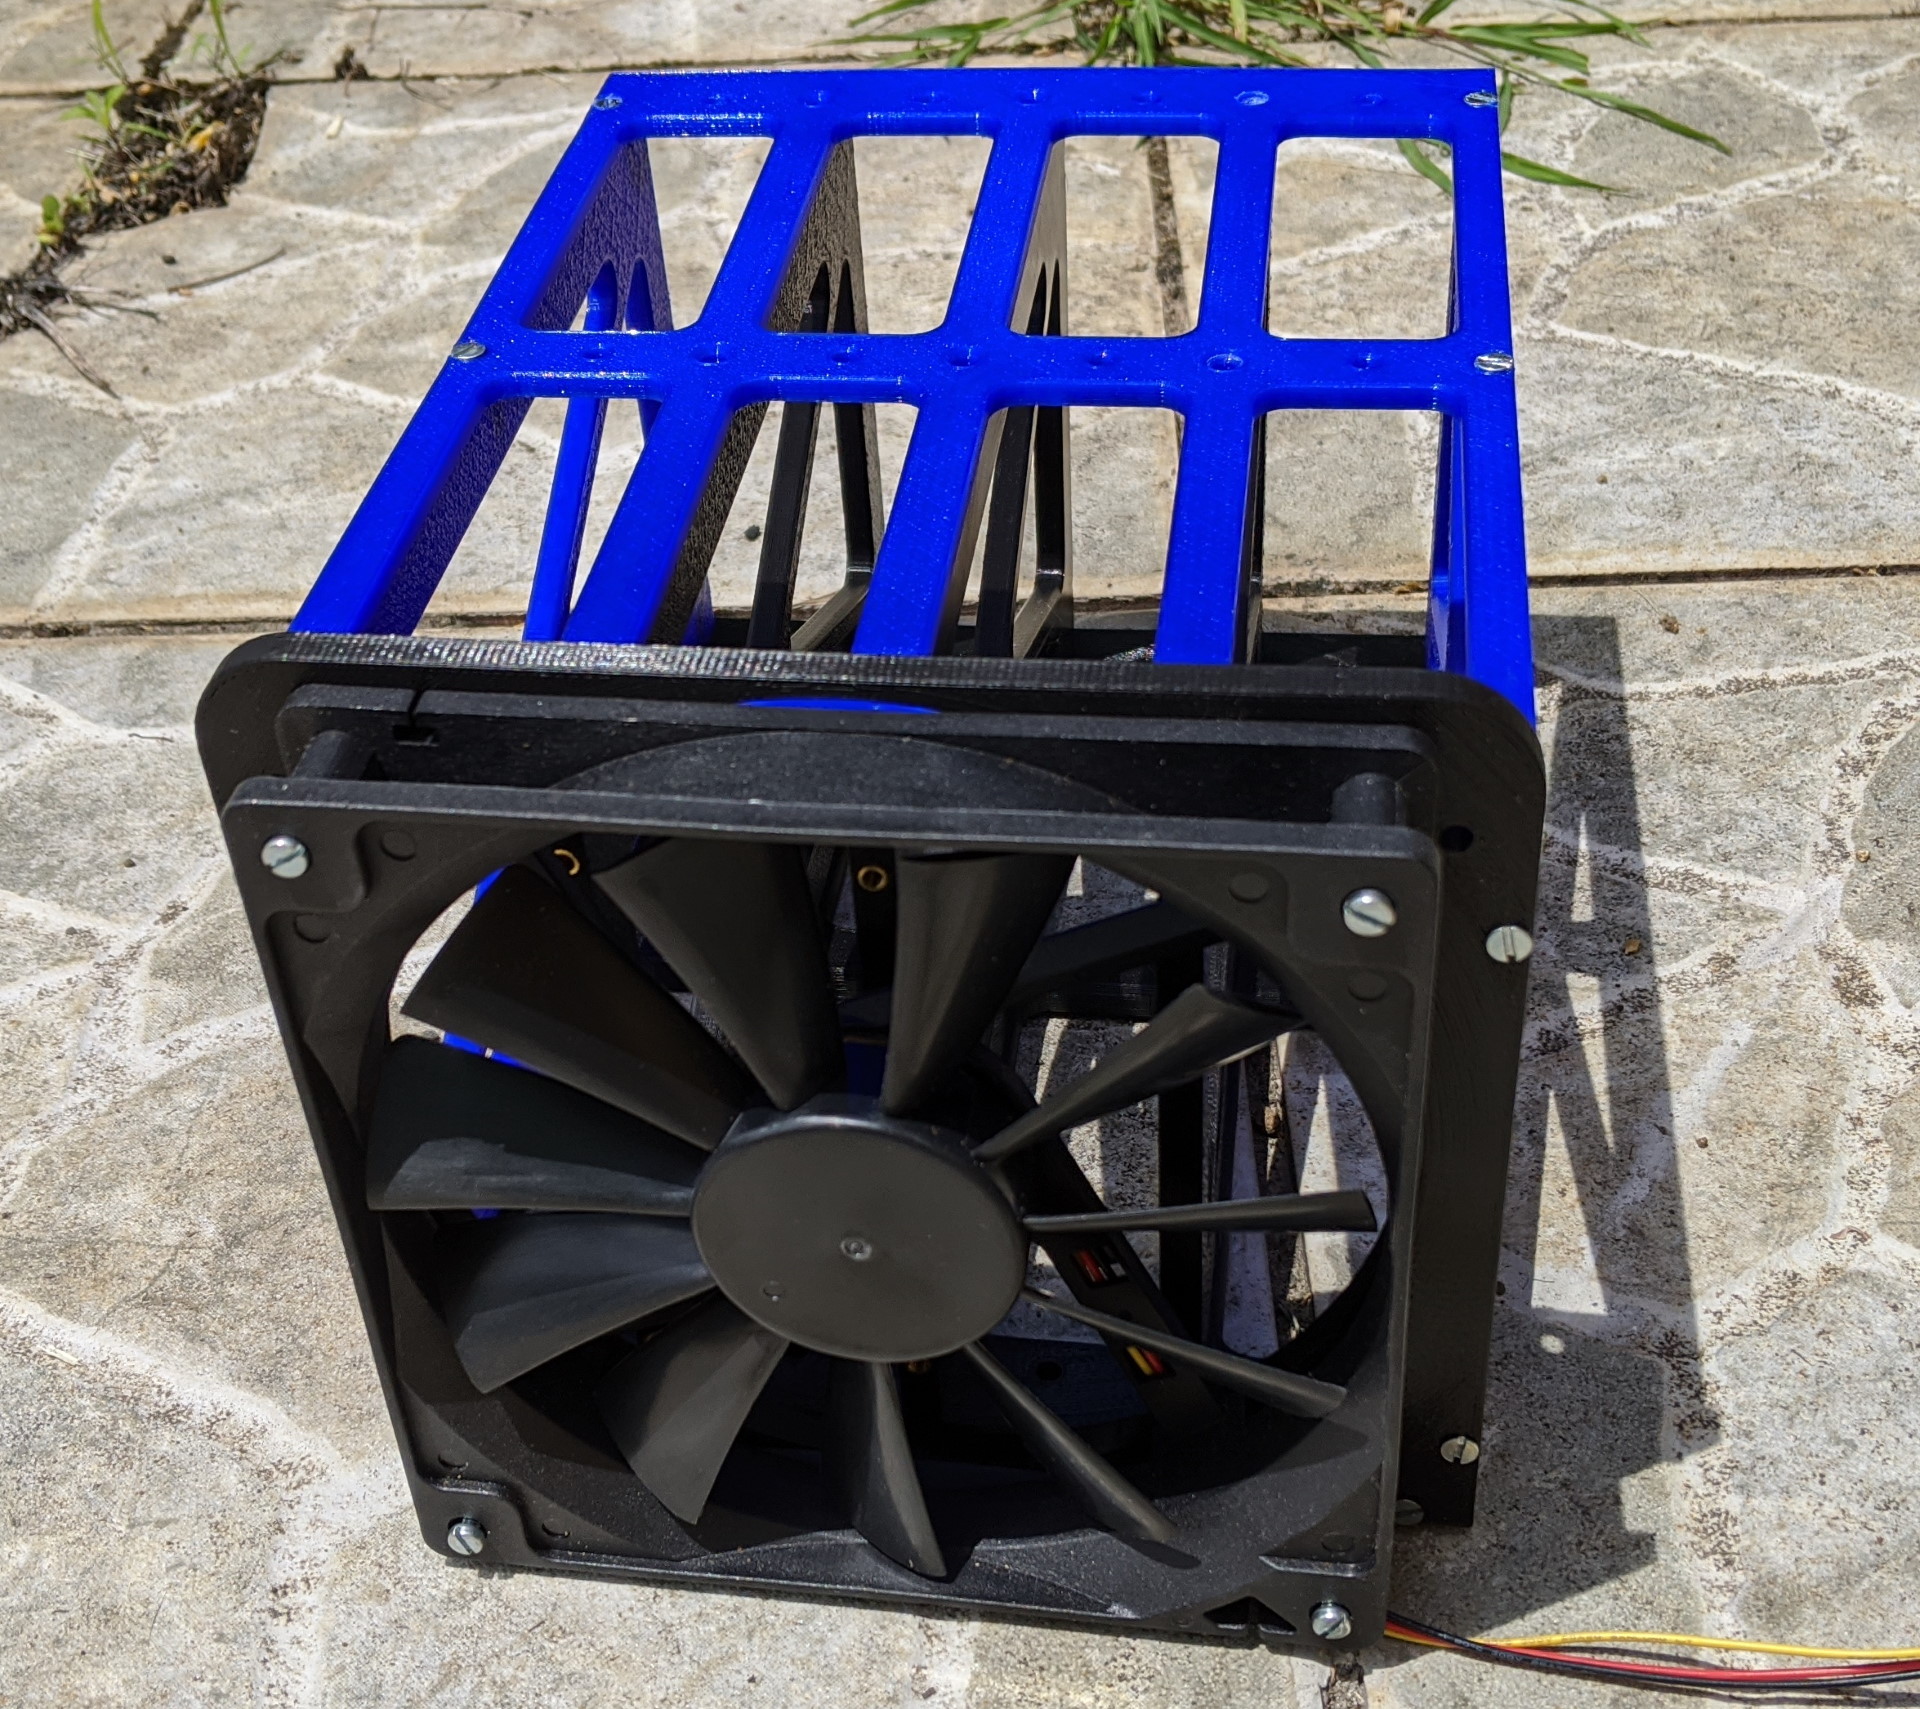 3D printable drive cage for raspberry pi NAS